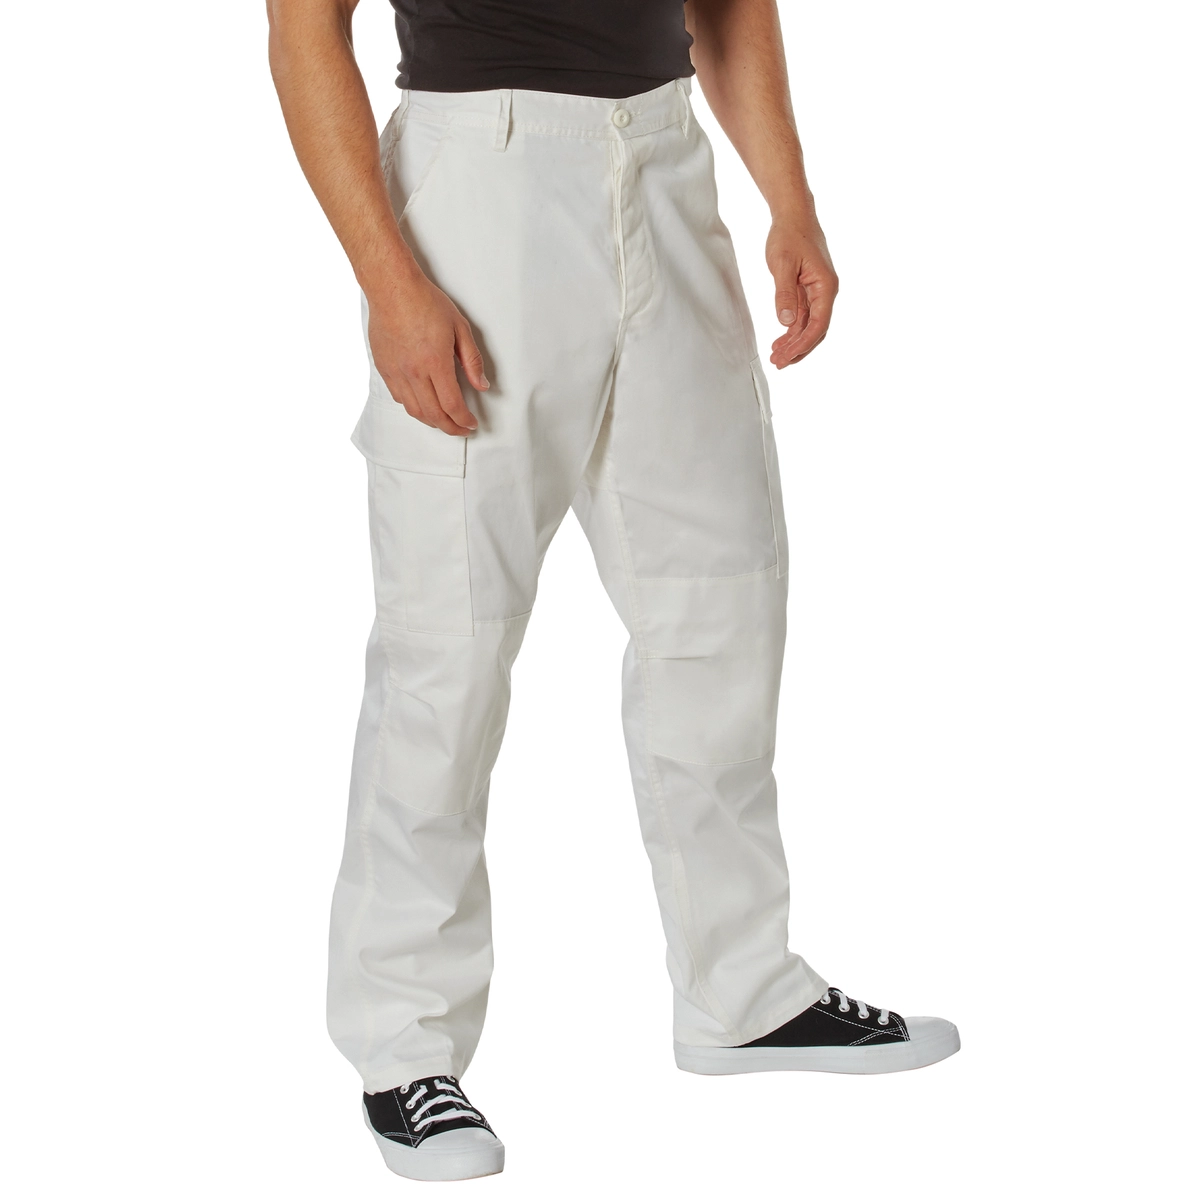 New off white color cargo pants